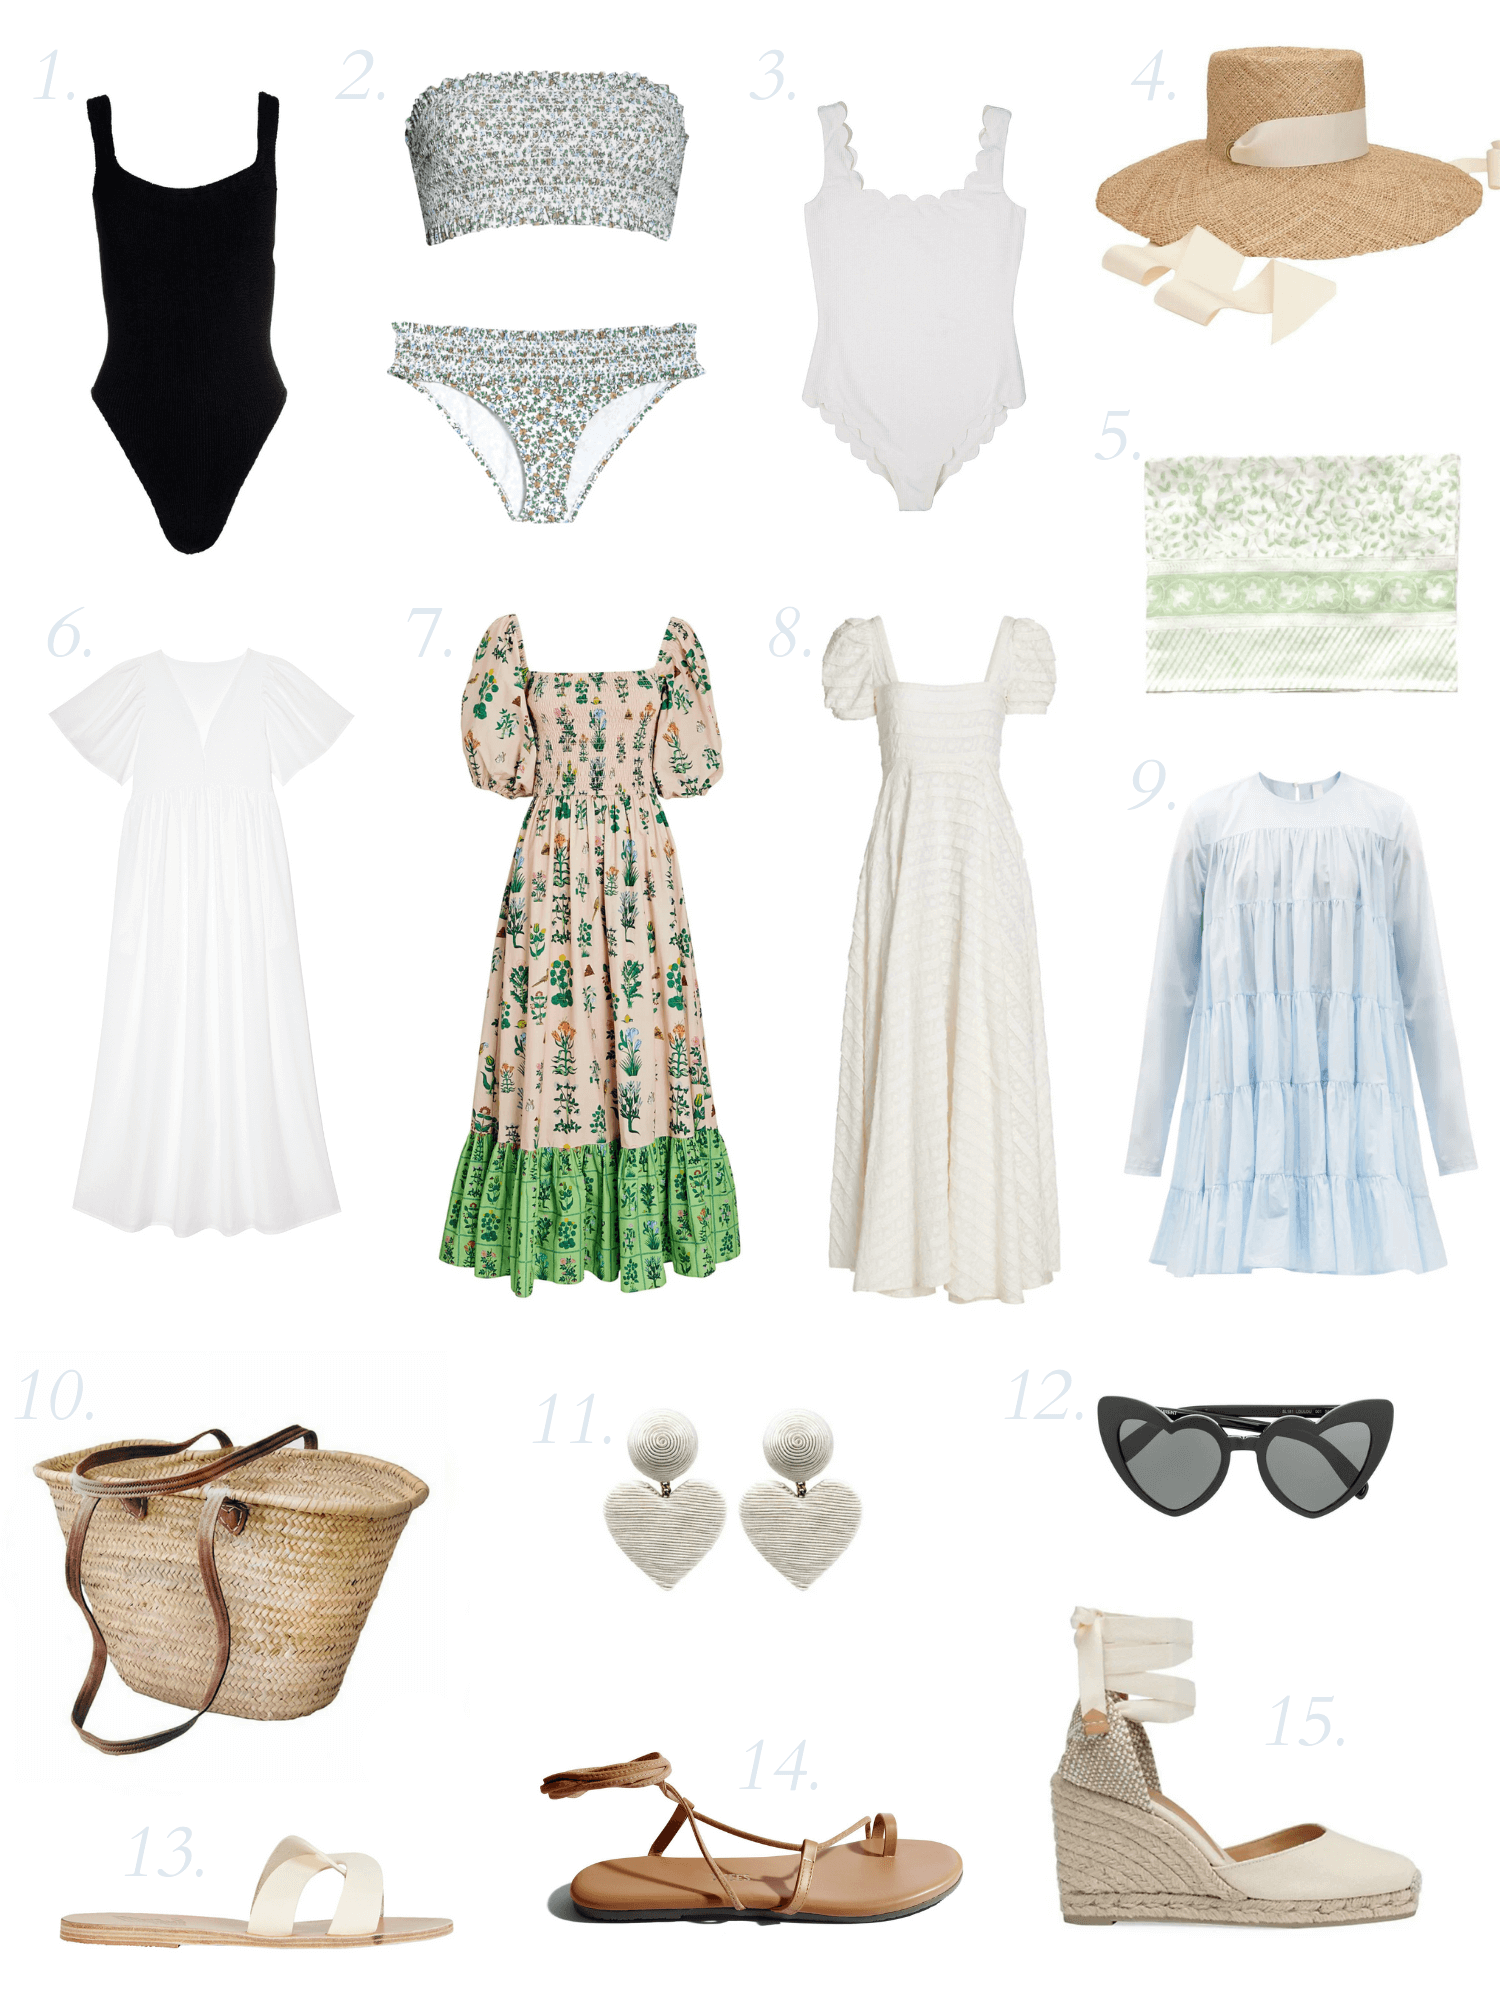 A summer beach vacation is the perfect trip to build your first travel capsule! Pack light (and make your trip even more relaxing) with mix-and-match outfits that make up your beach vacation capsule wardrobe.